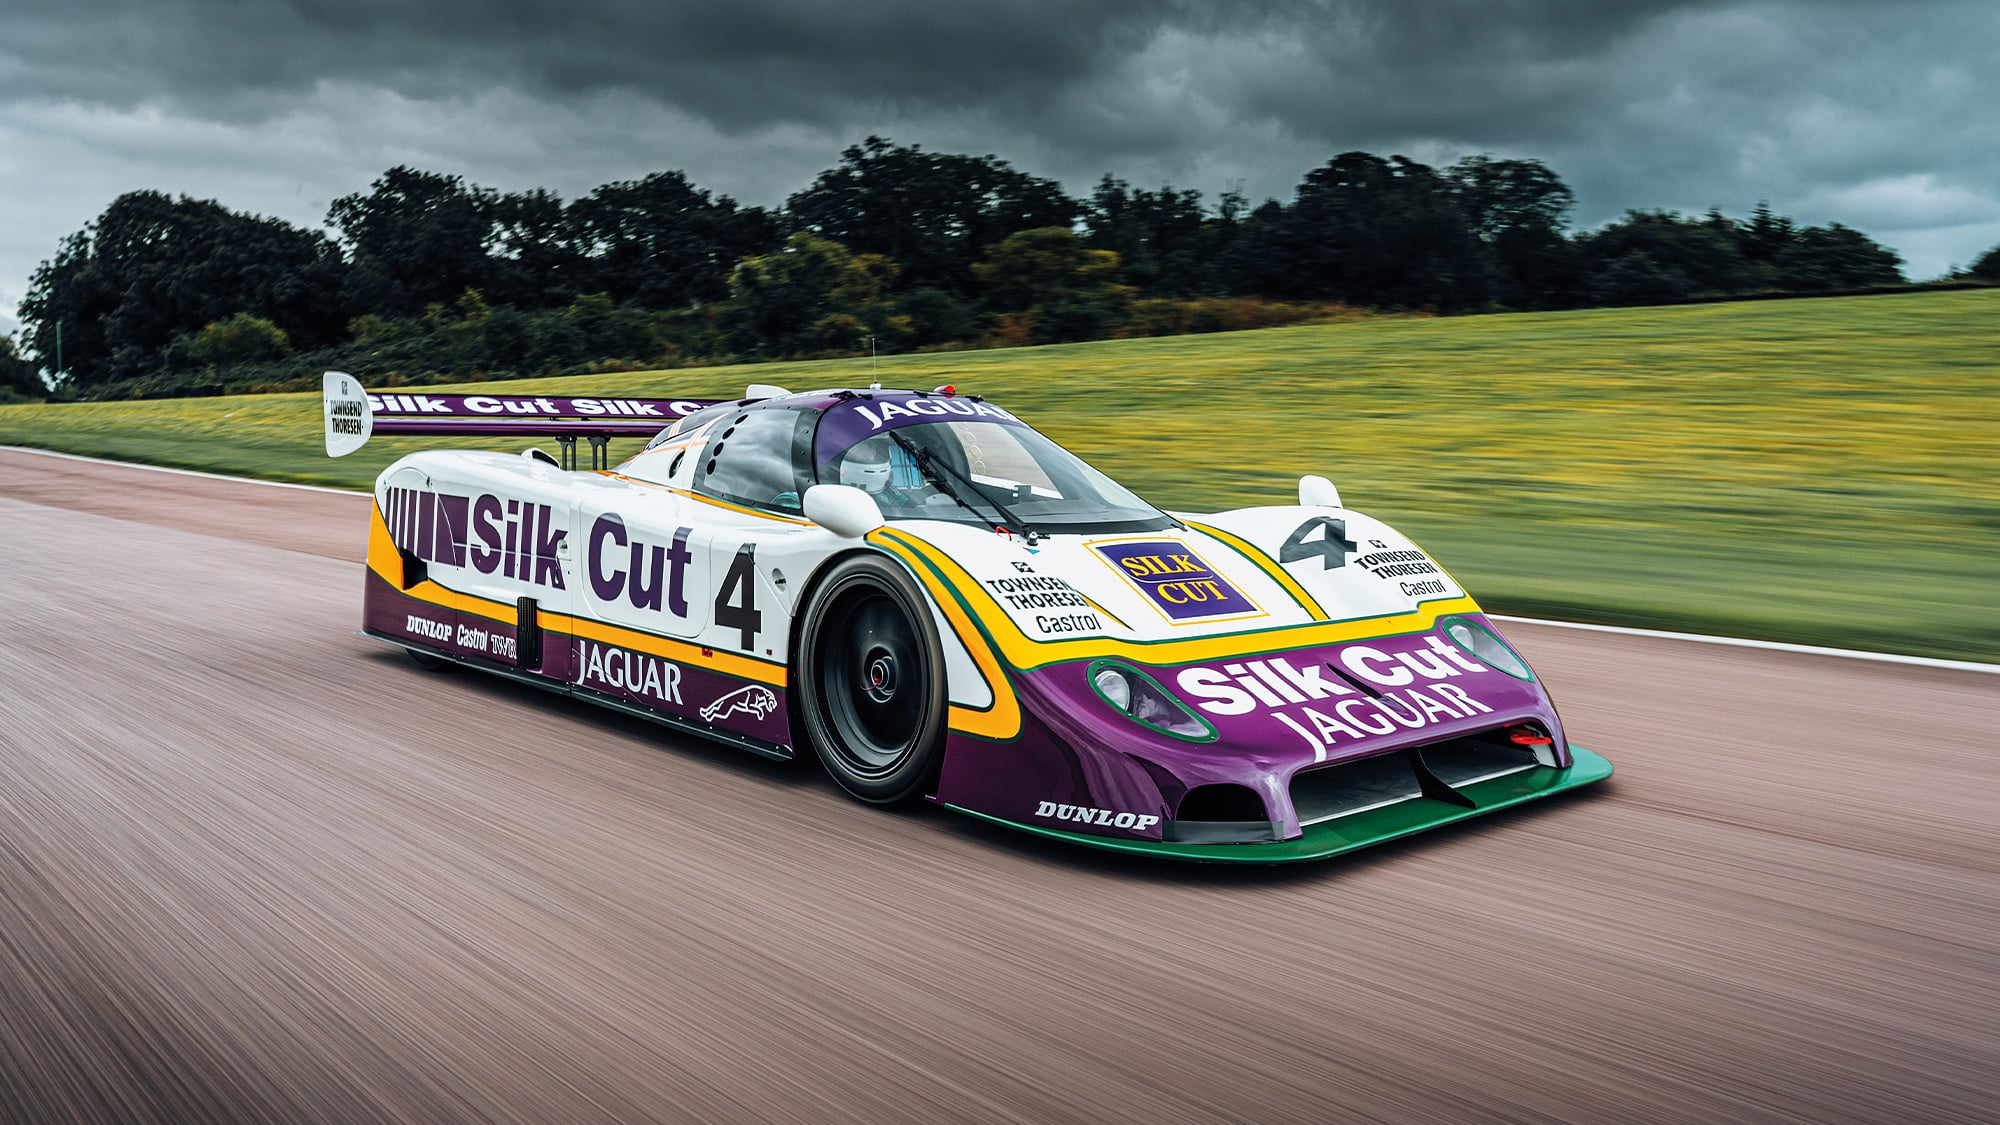 Front view of Jaguar XJR-8 on track